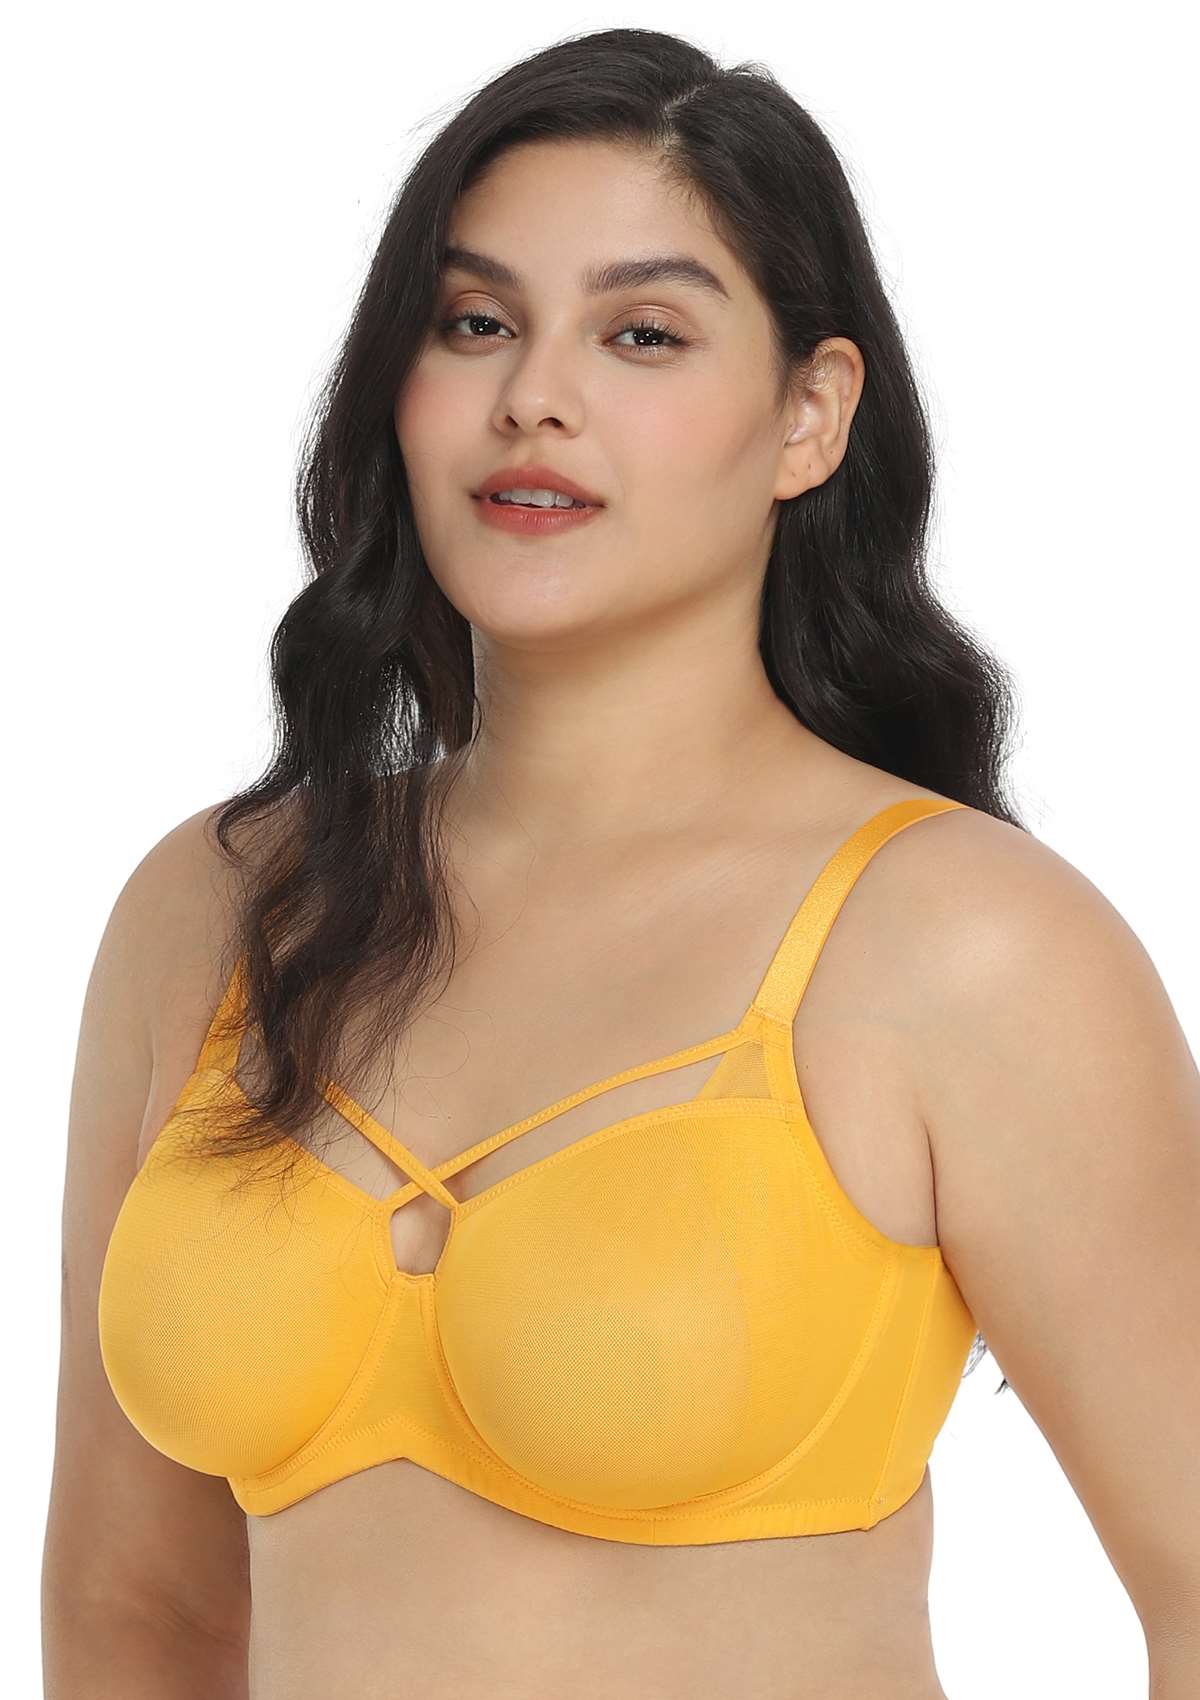 HSIA Billie Cross Front Strap Smooth Sheer Mesh Comfy Underwire Bra - Yellow / 36 / D